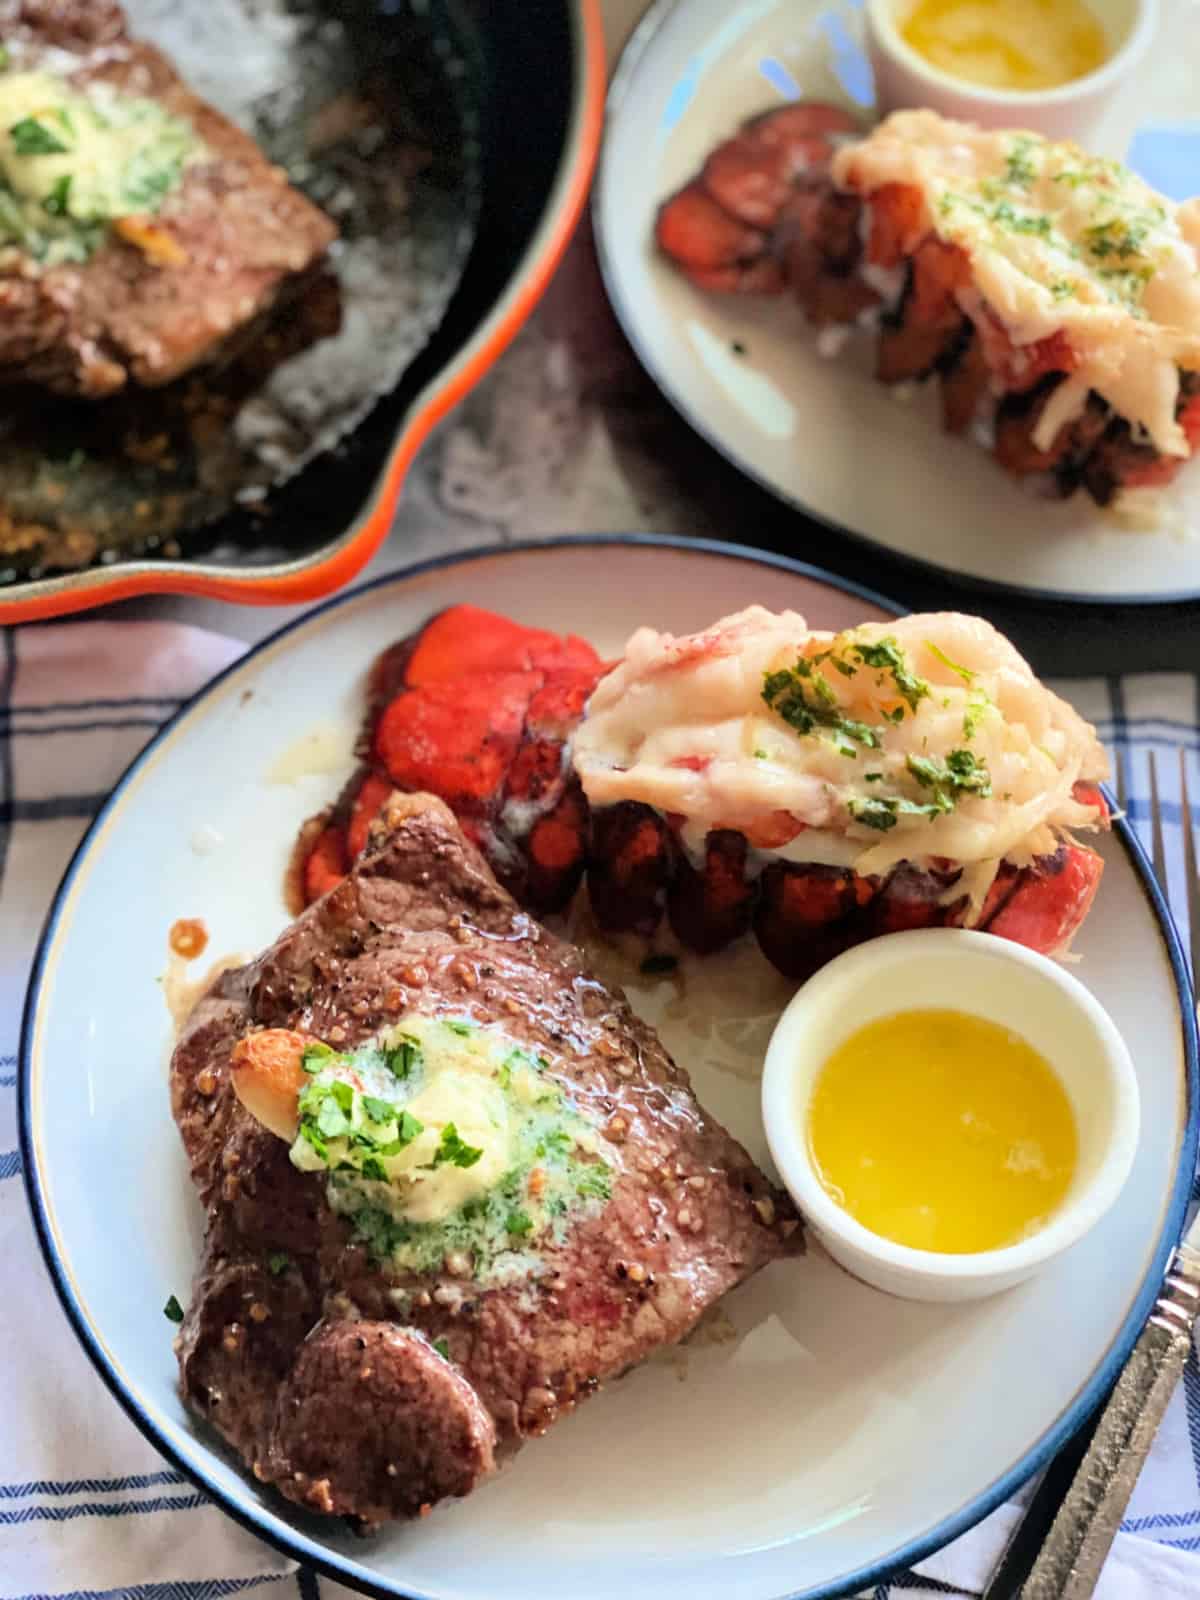 Steak with compound butter, lobster tail, and drawn butter in a little cup with another plate behind it.